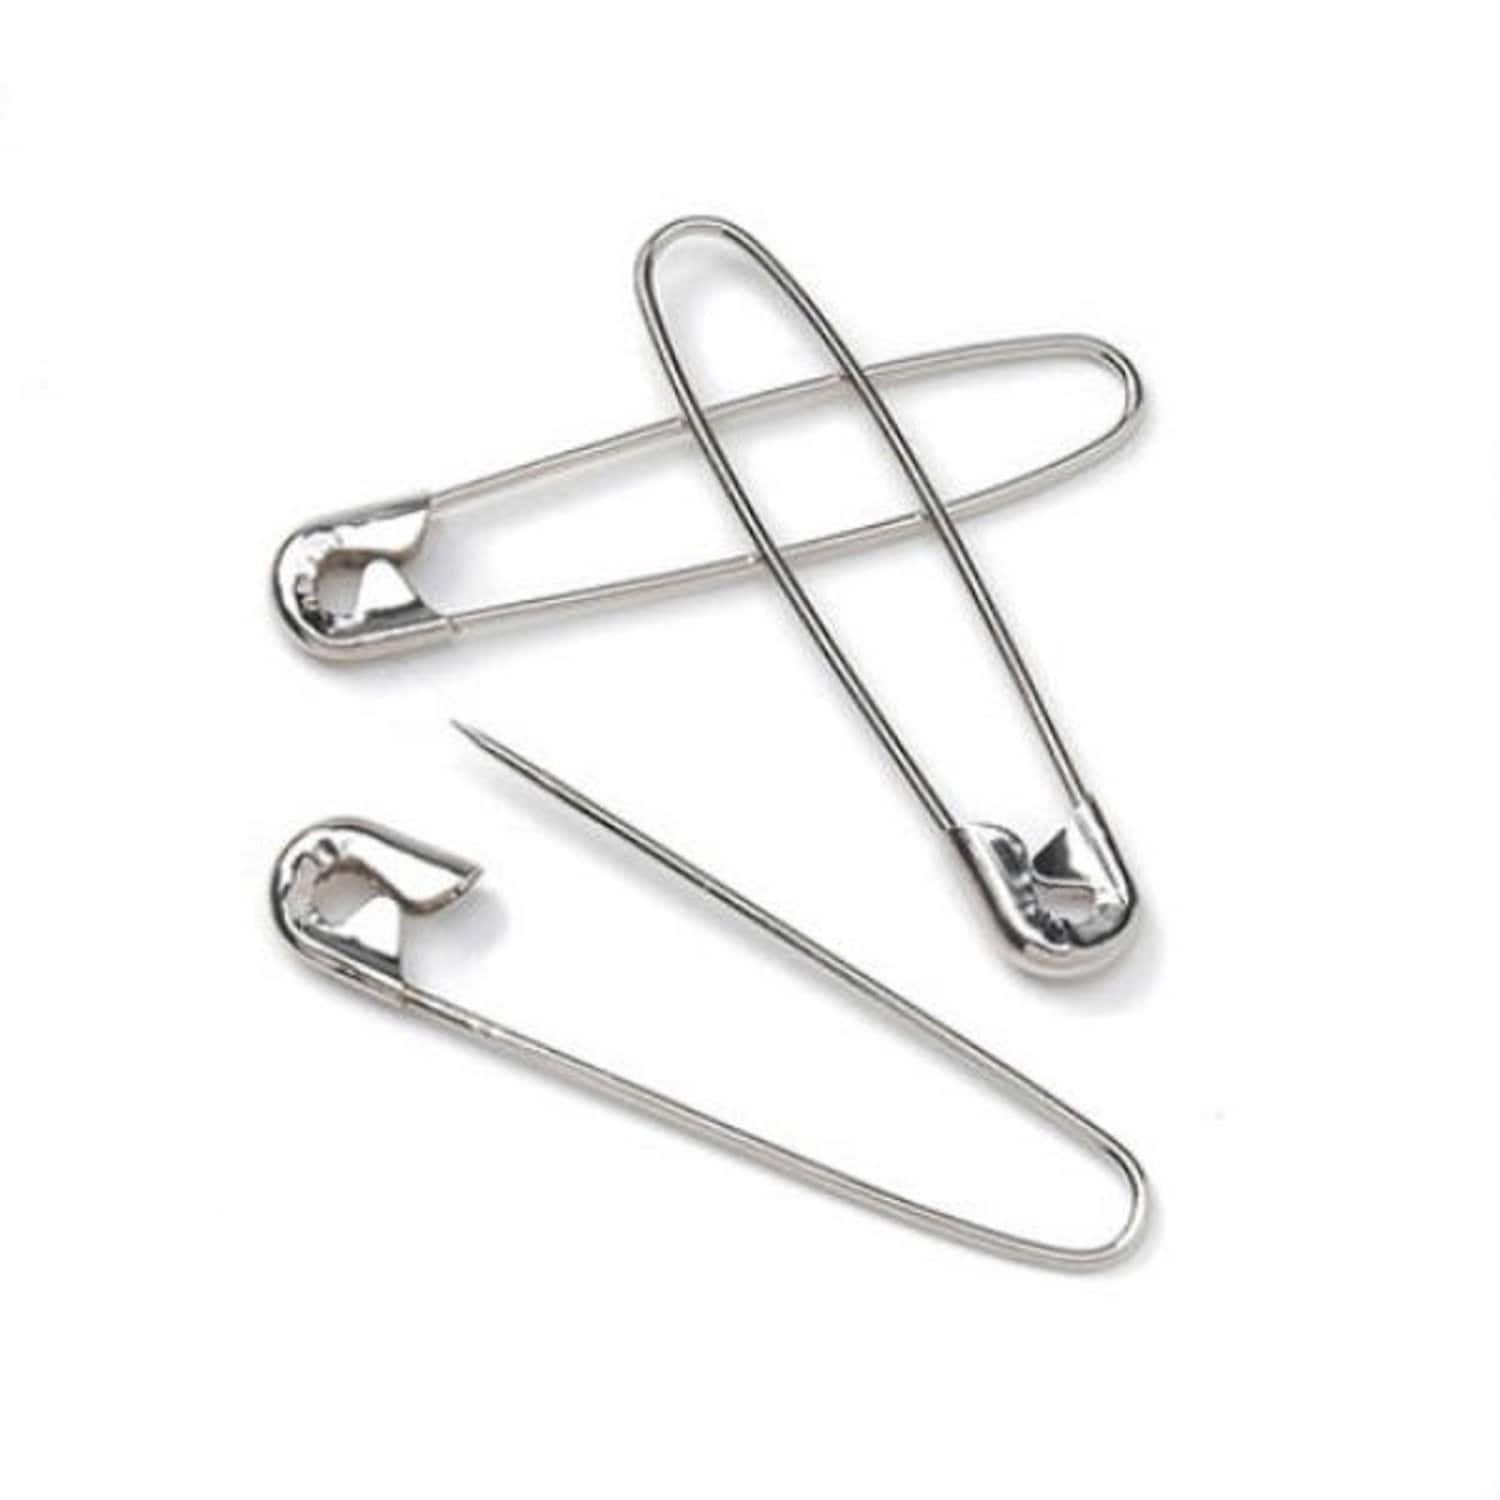 Darice Coiless Safety Pins- 1.5 Inch Gold 25 Per Package - Coiless